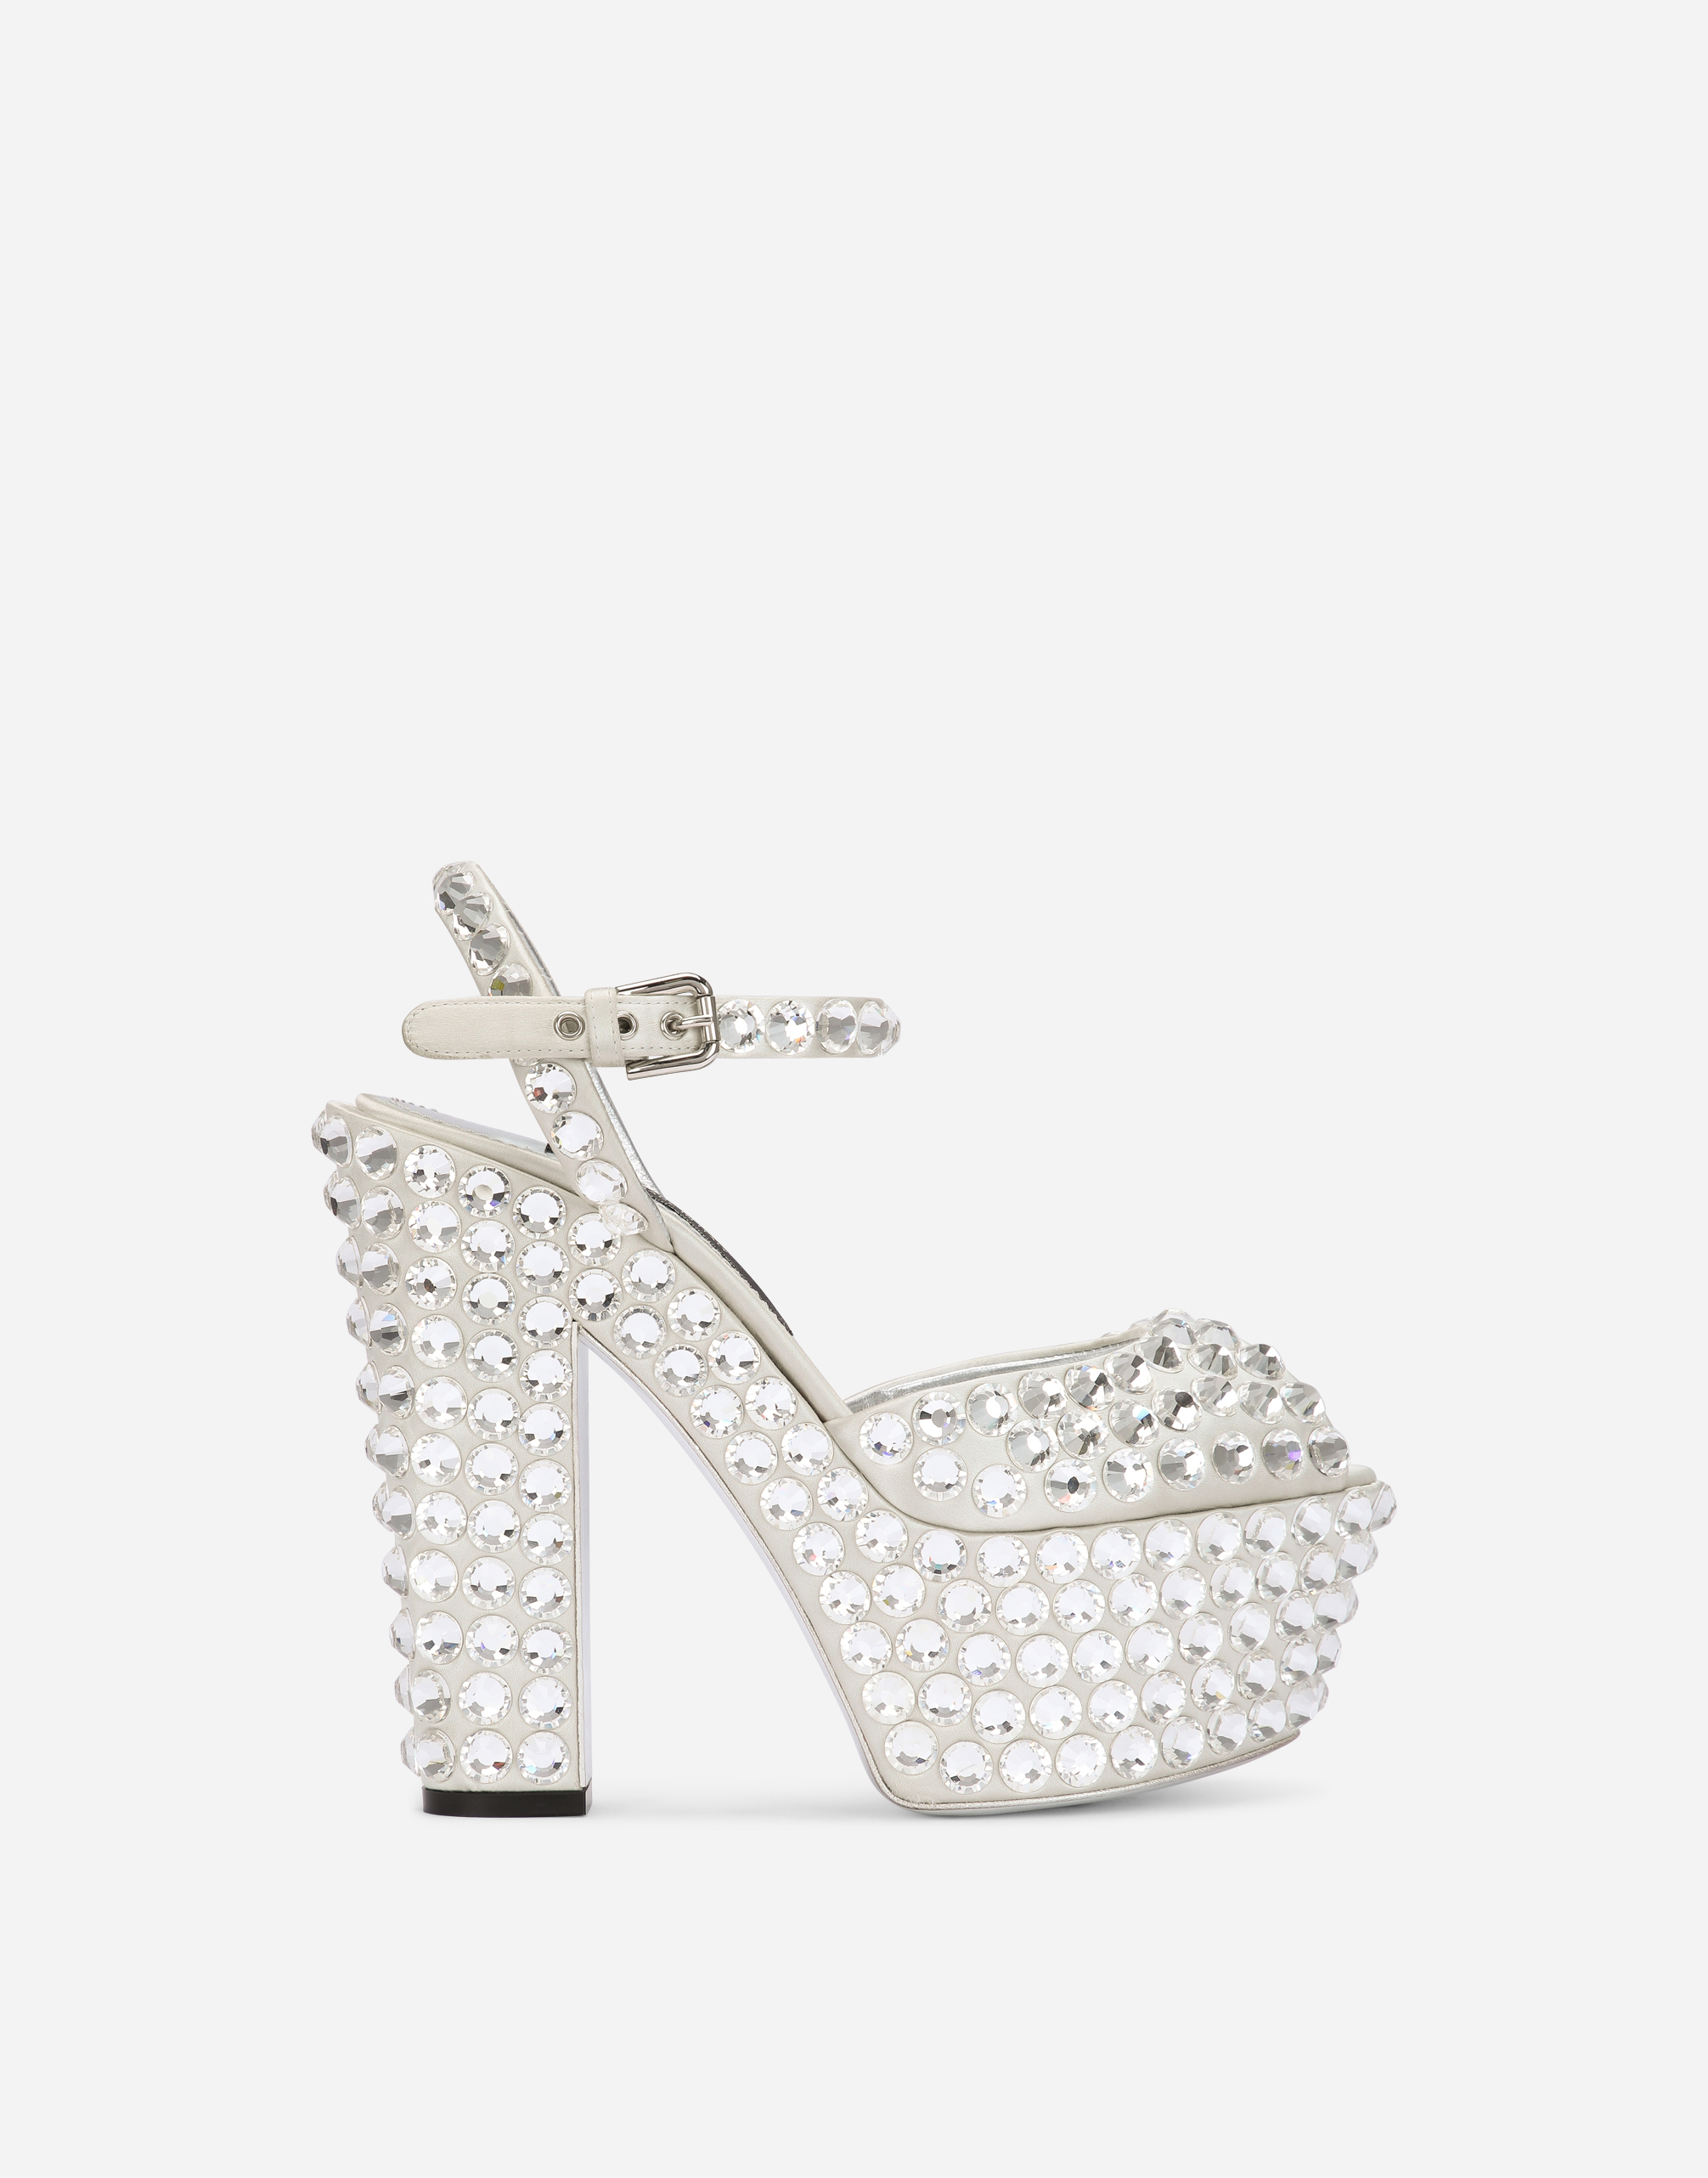 Dolce & Gabbana Satin Platforms With Fusible Rhinestones In Silver